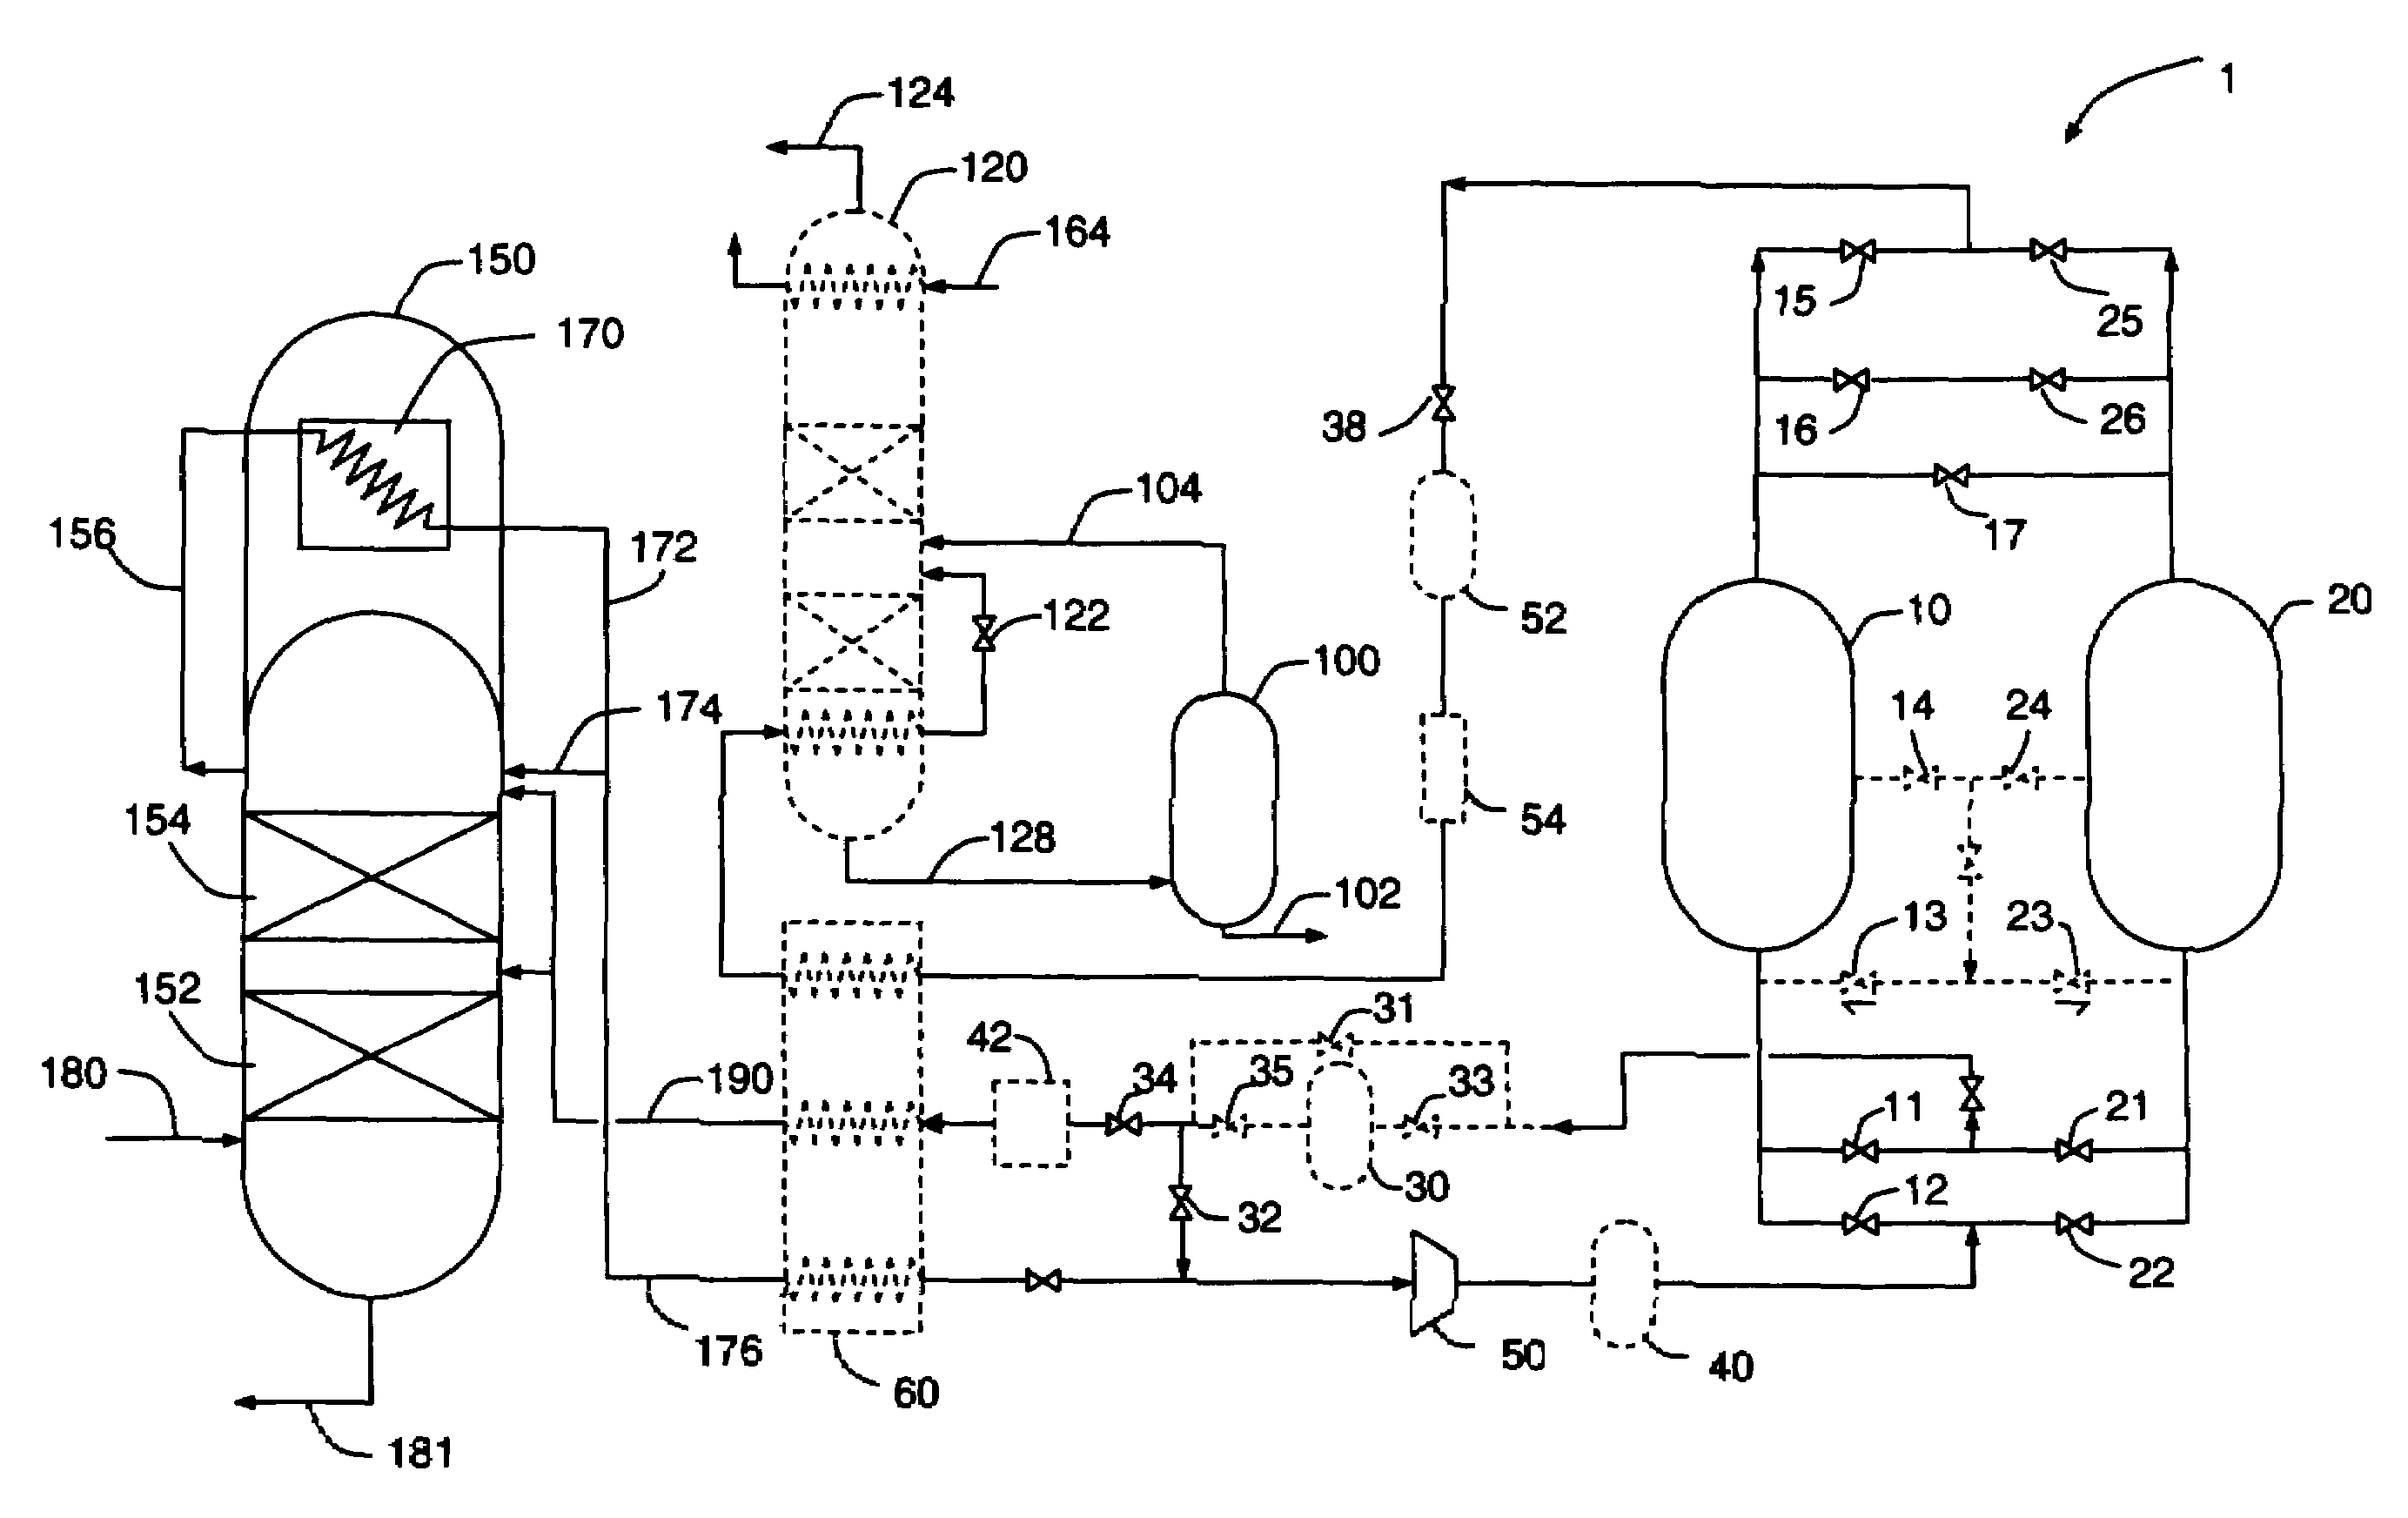 Combined cryogenic distillation and PSA for argon production